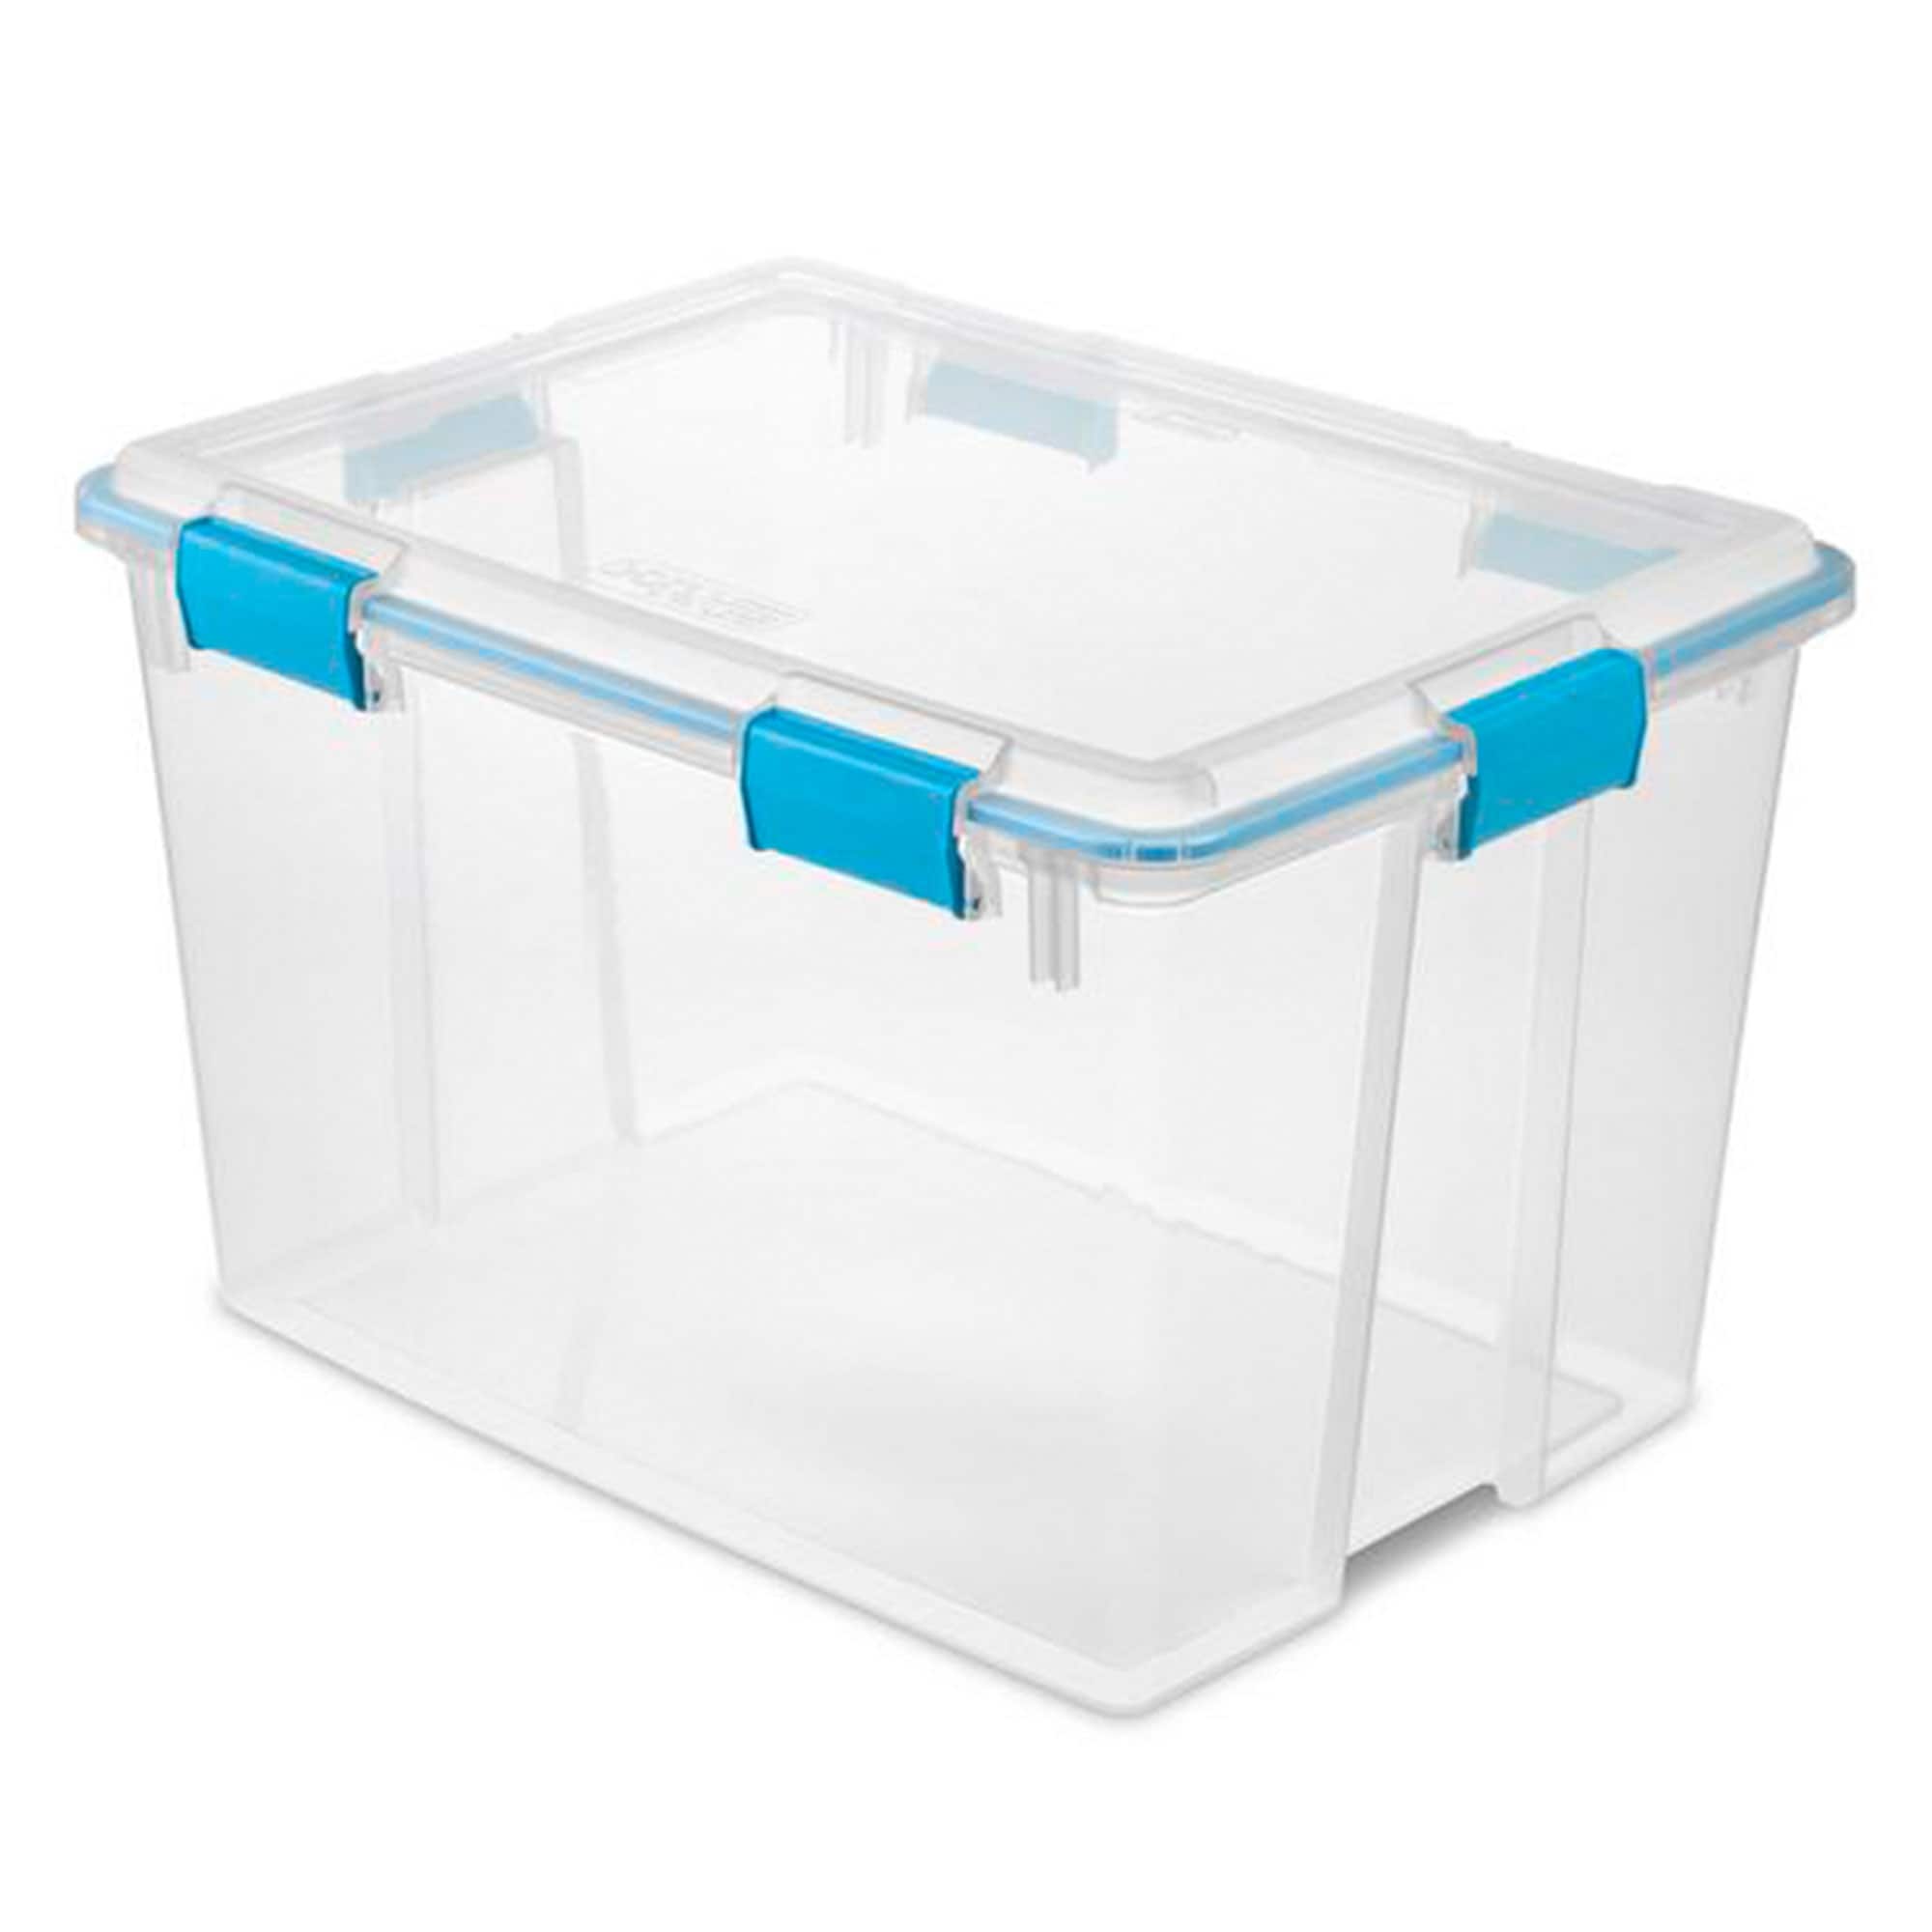 https://ak1.ostkcdn.com/images/products/is/images/direct/ea7ec505c07ec7198e2e2b0eb6343bc35403b2cd/Sterilite-80-Qt-Clear-Plastic-Stackable-Storage-Bin-w--Gasket-Latch-Lid%2C-8-Pack.jpg